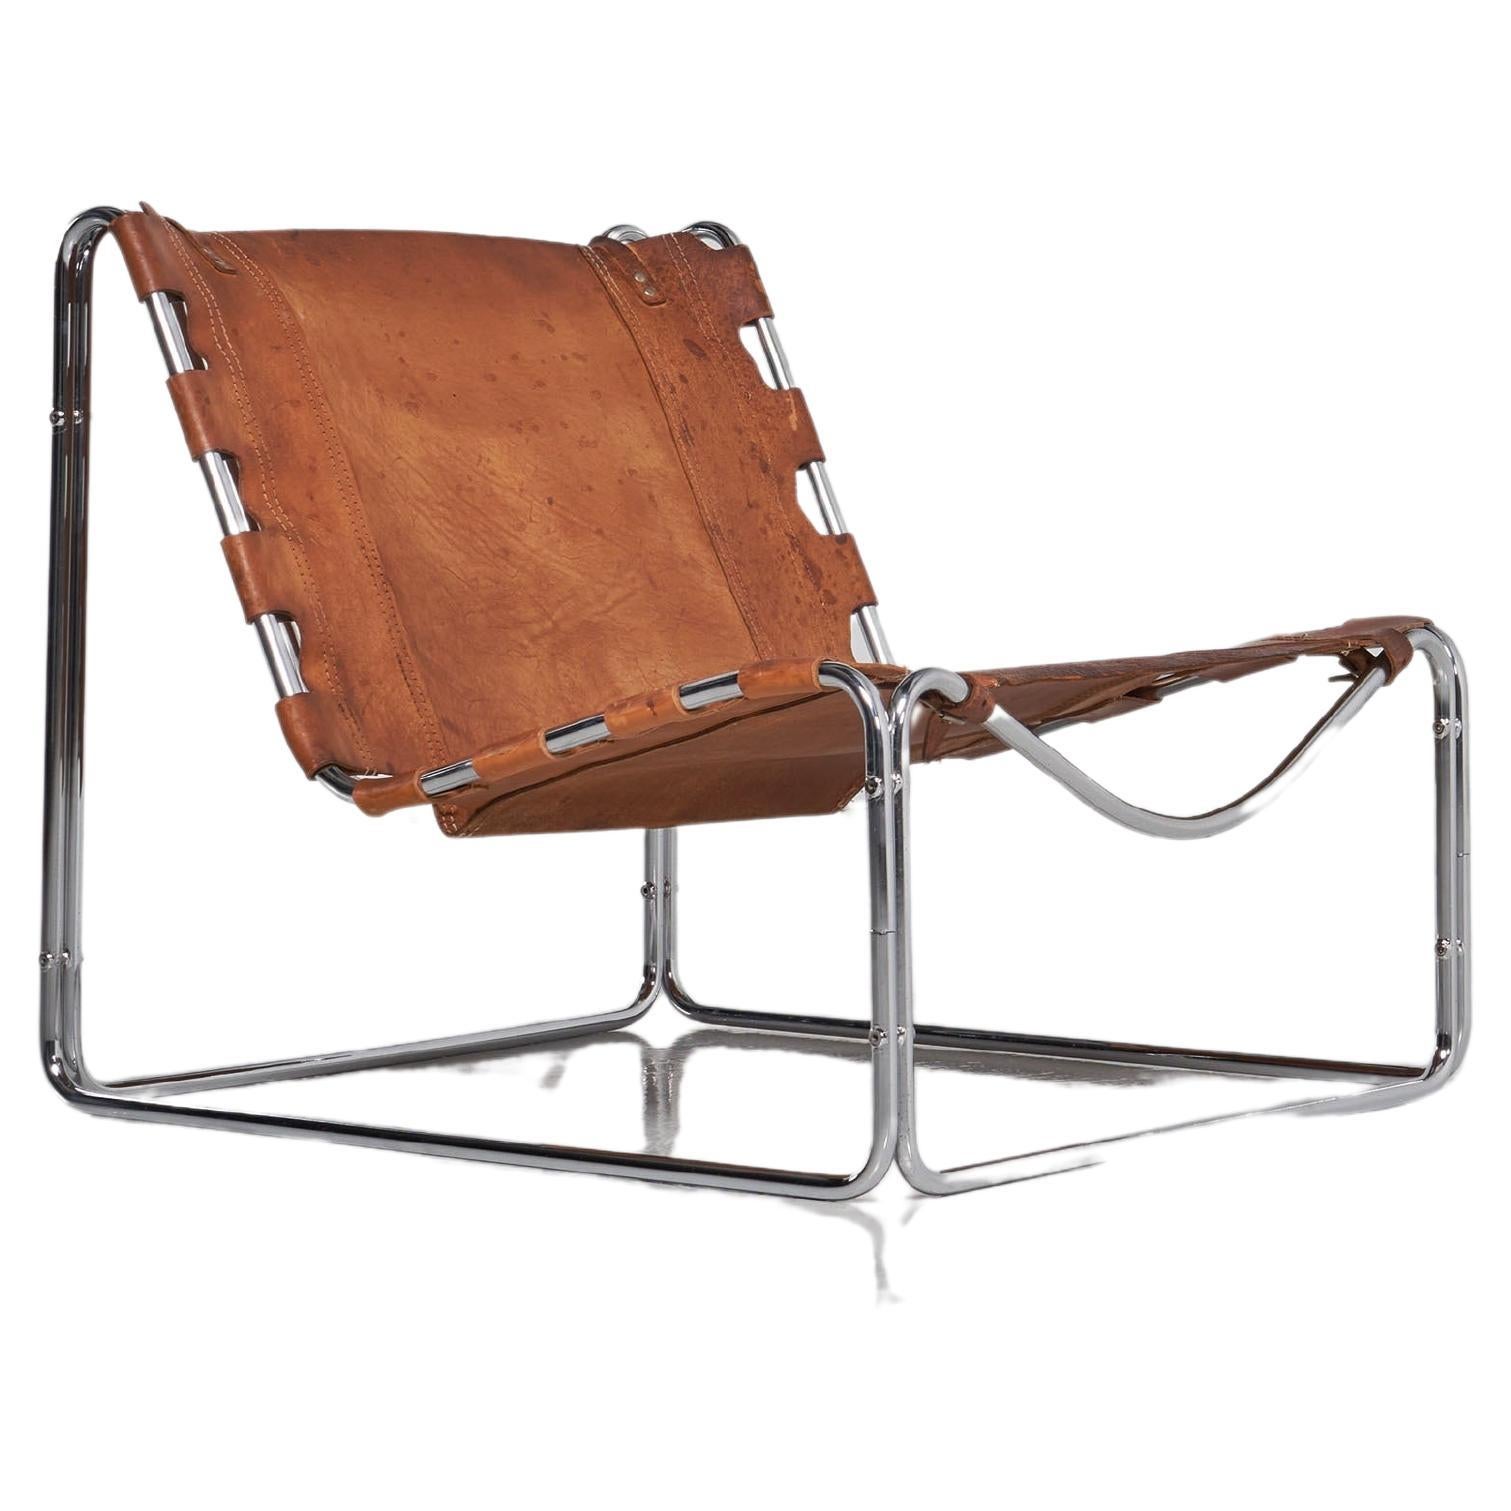 Pascal Mourgue Fabio lounge chair Steiner France 1970